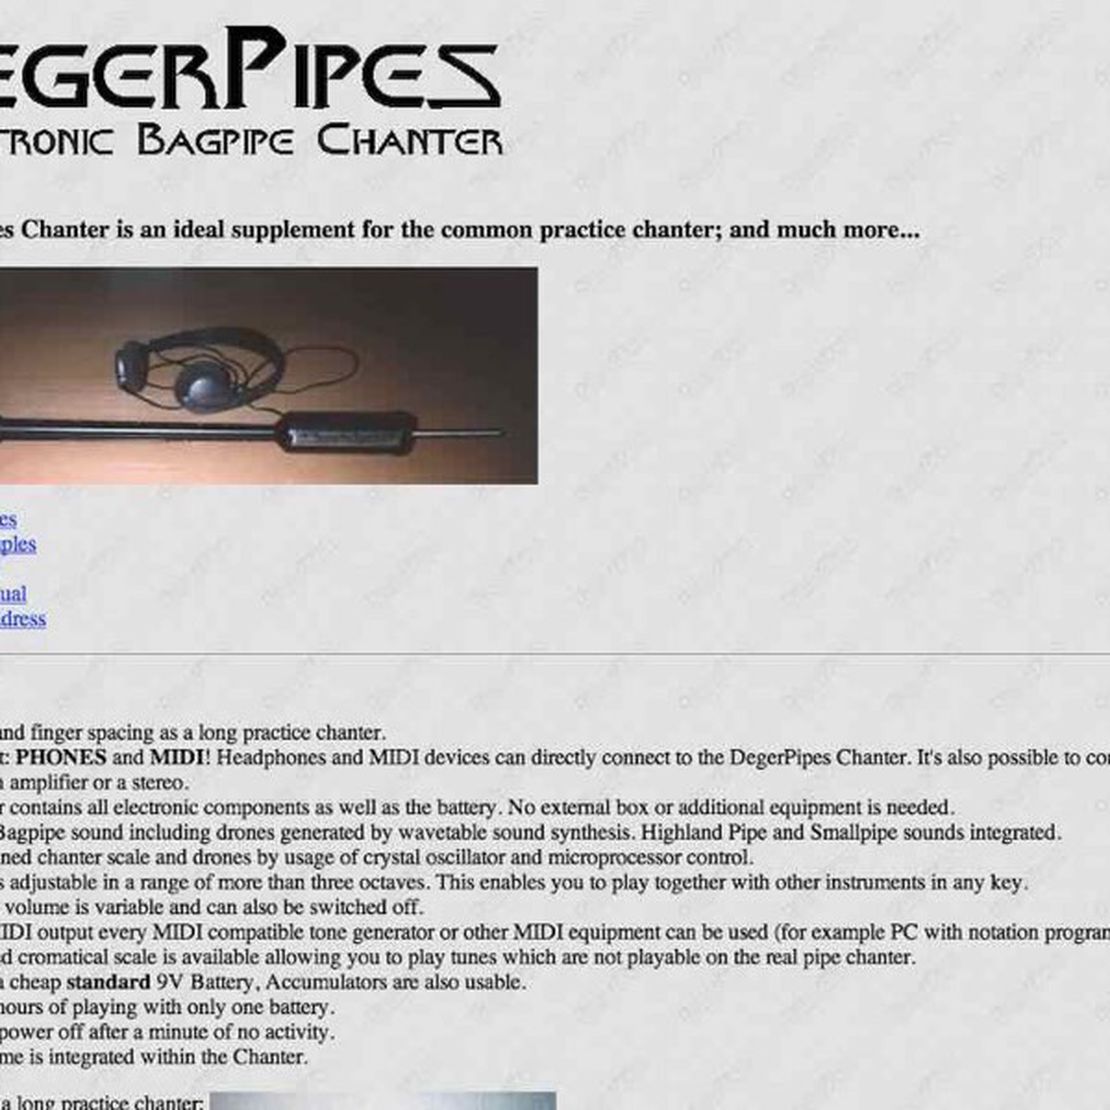 deger pipes electronic bagpipe chanter